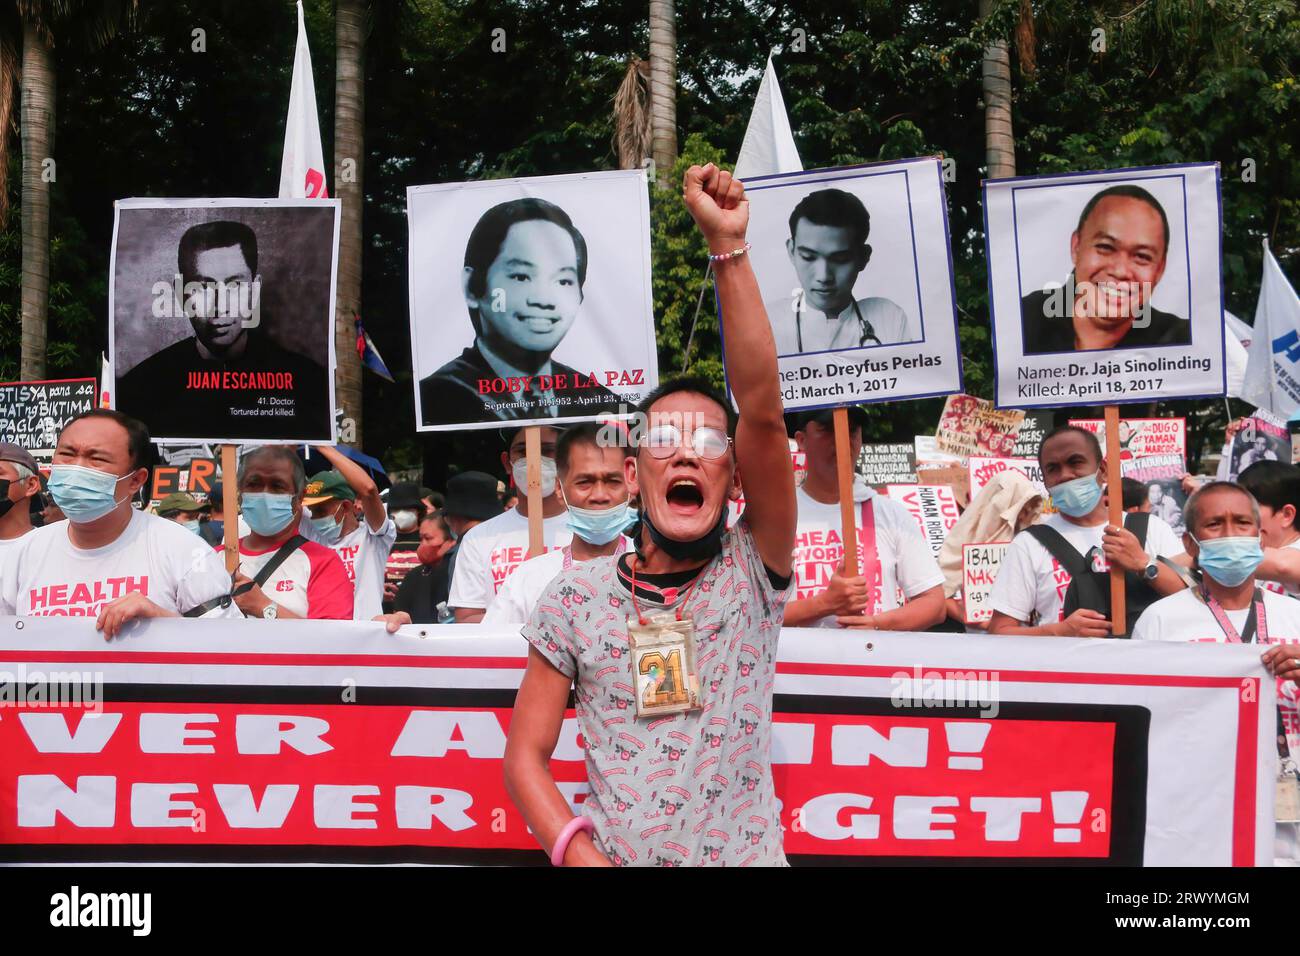 An activist gestures during the demonstration. Extremists marched in Manila to mark the 51st anniversary of the declaration of Martial Law in the Philippines by the late dictator Ferdinand Emmanuel Edralin Marcos Sr. The Martial Law marked as tumultuous phase in Philippine history. Former President Marcos placed the entire Philippines under Martial Law that lasted from September 21, 1972 to January 17, 1981. During that time, Marcos cracked down on dissent and imprisoned thousands of his political critics. The dictator's family, with the power of Ferdinand Marcos Jr., a current Philippine pres Stock Photo